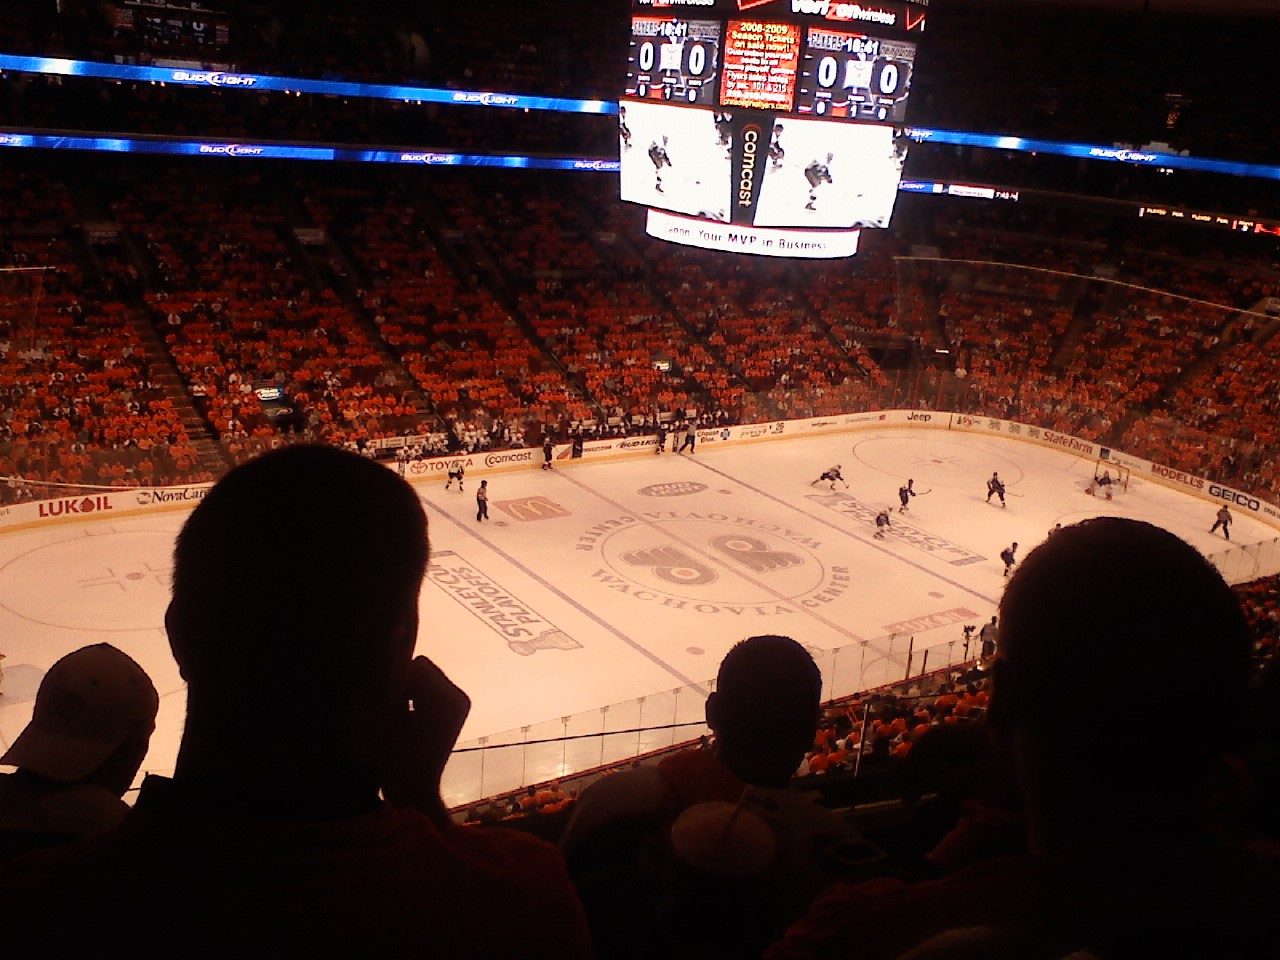 section 210a, row 4 seat view  for hockey - wells fargo center